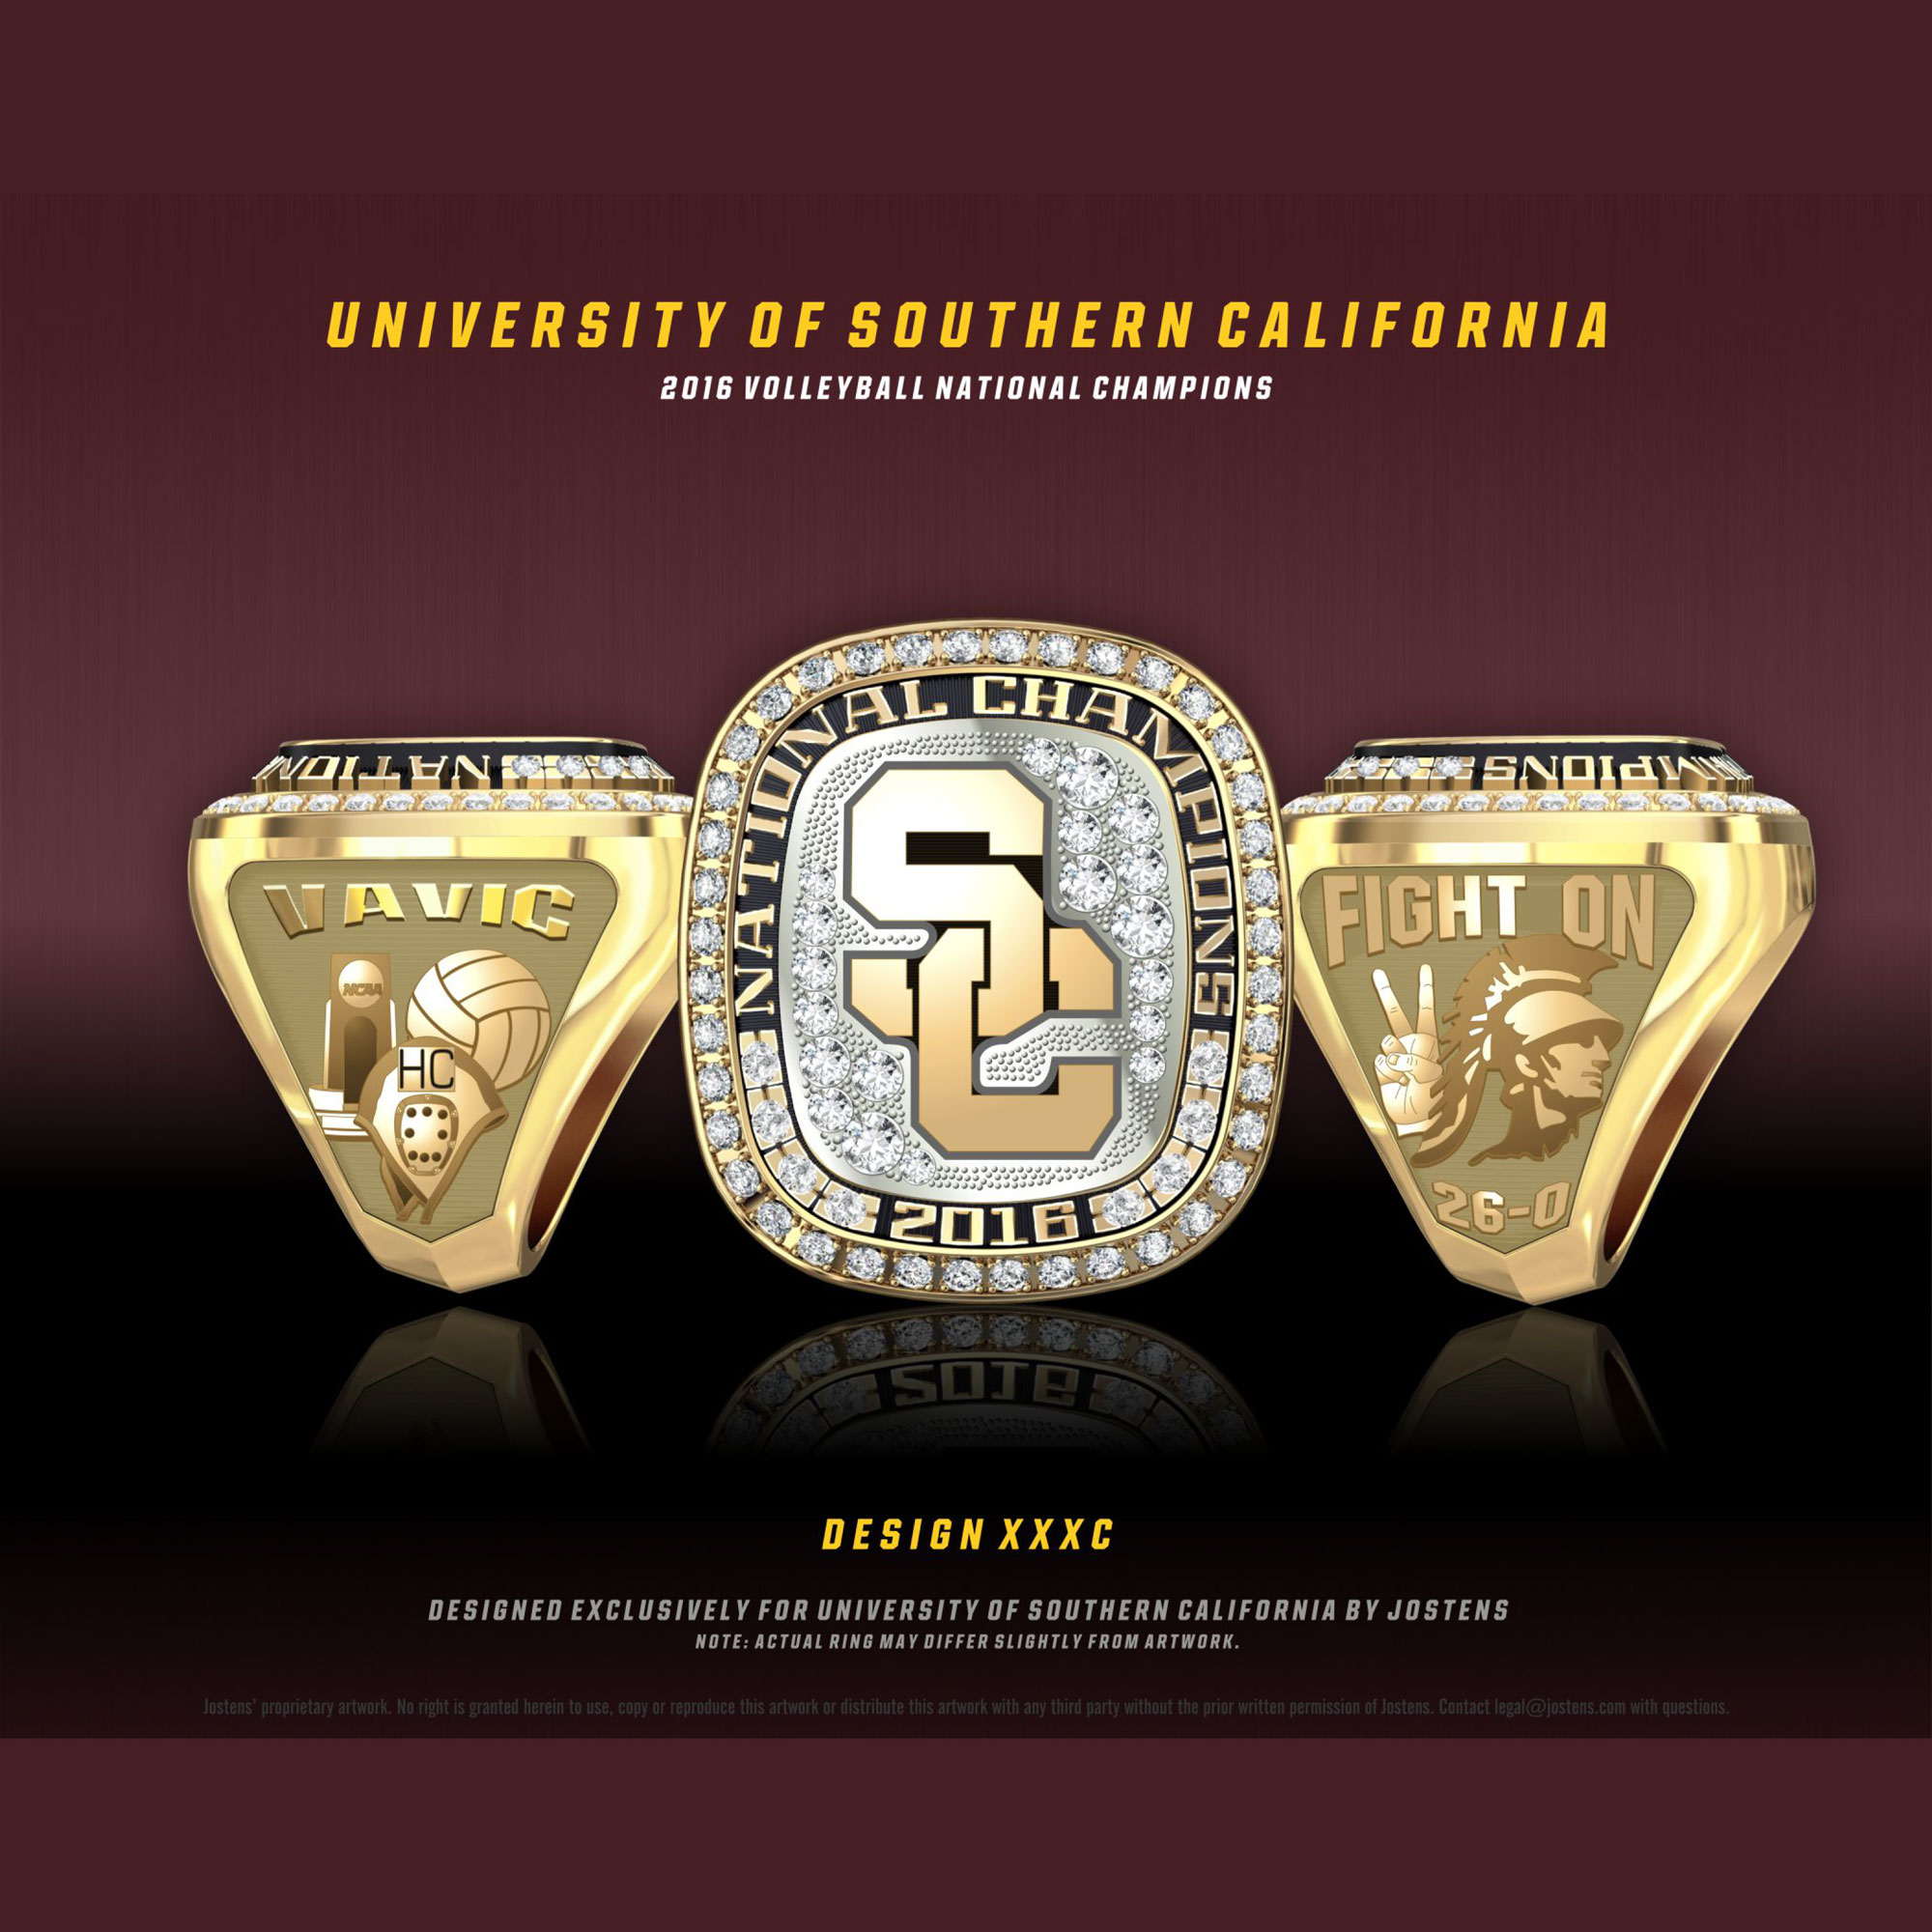 USC Men's Water Polo 2016 National Championship Ring